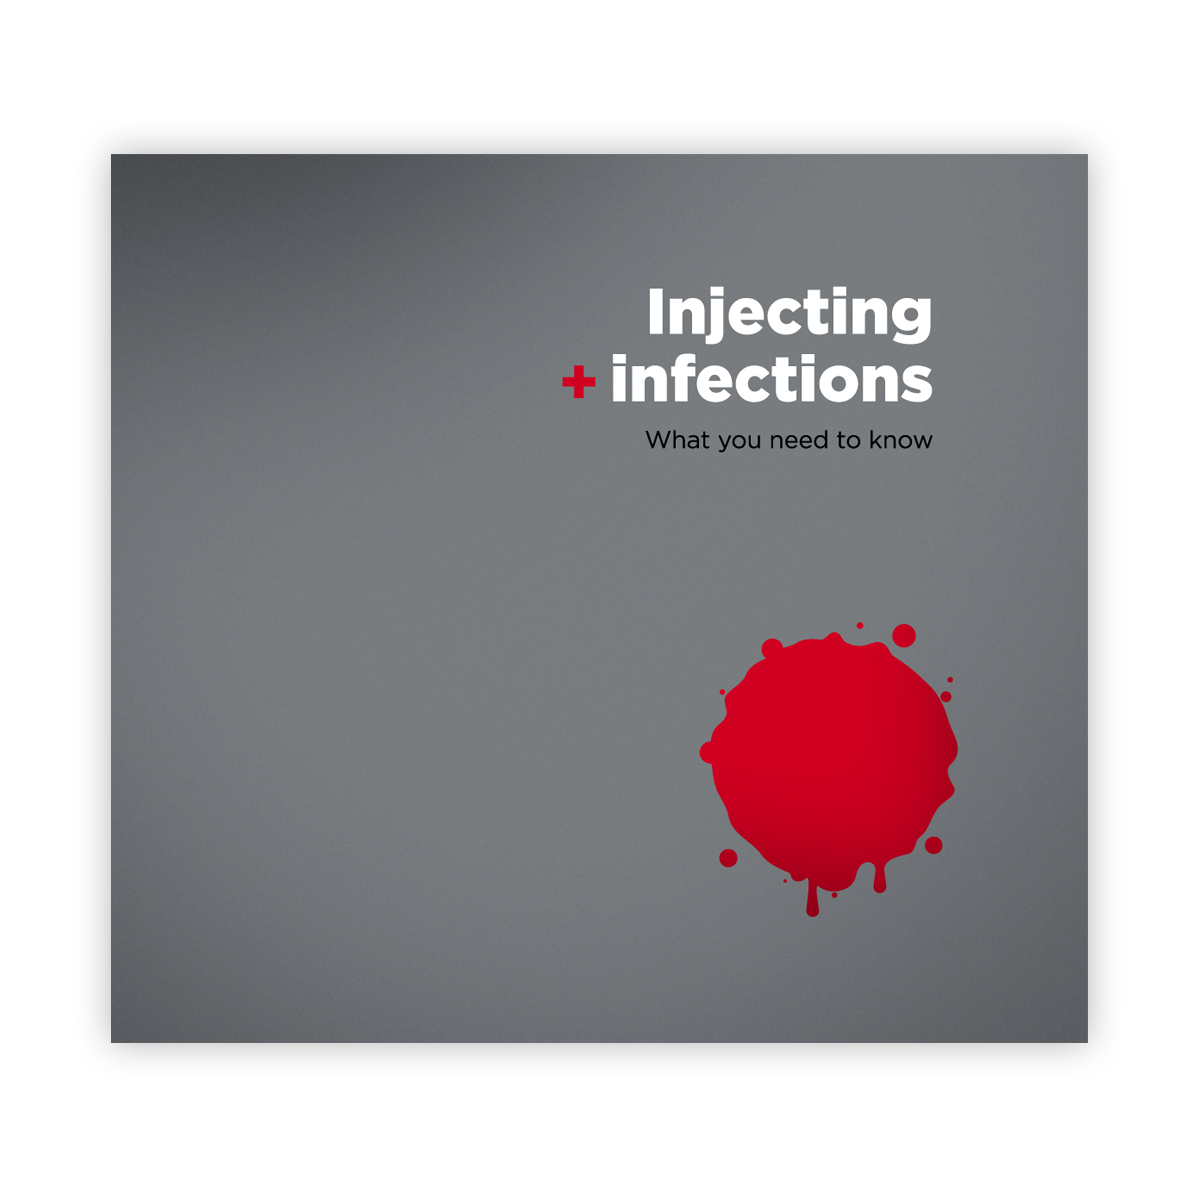 Injecting and infections: what you need to know 